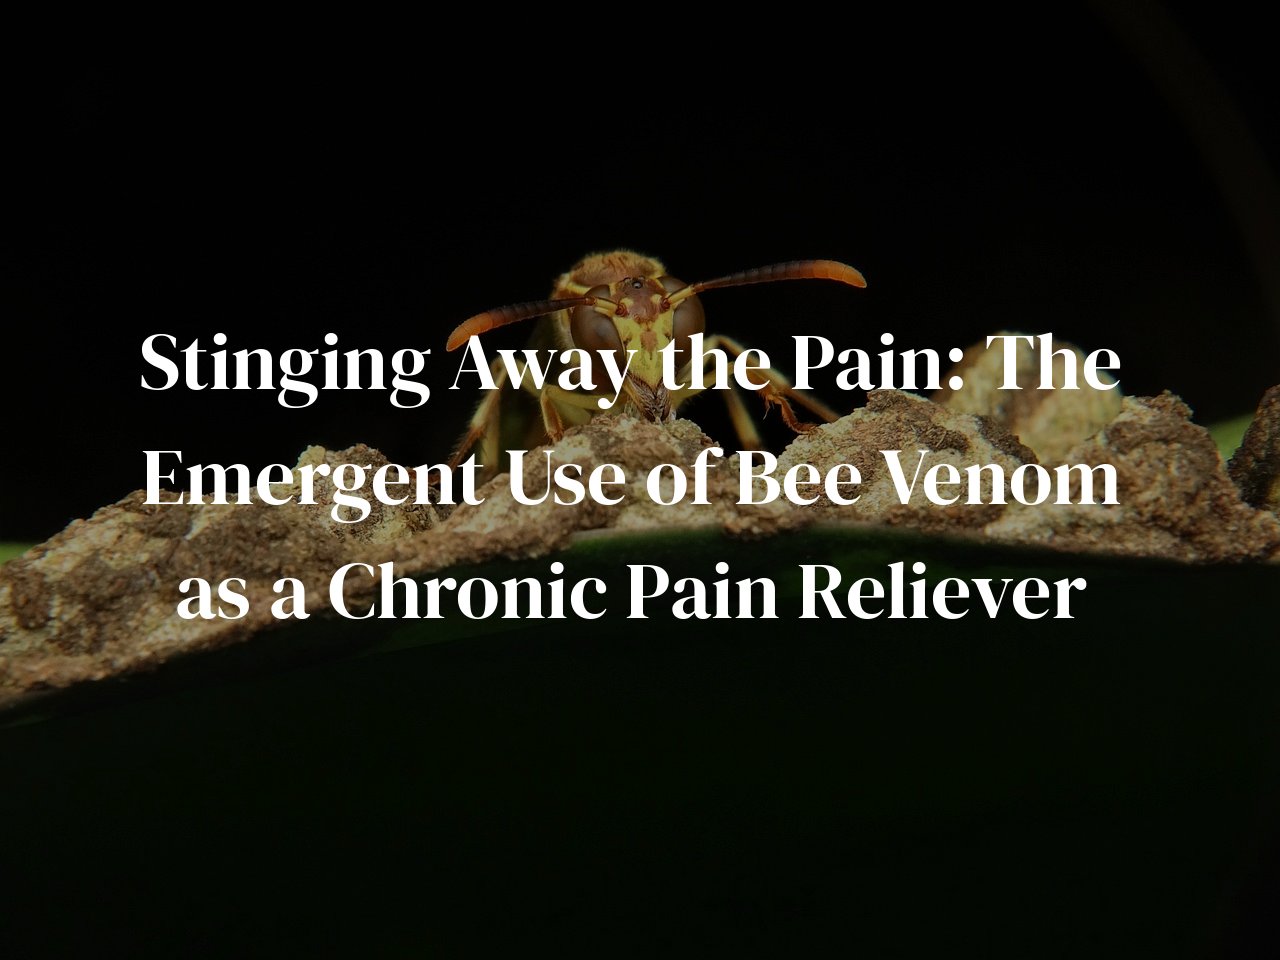 Stinging Away the Pain: The Emergent Use of Bee Venom as a Chronic Pain Reliever